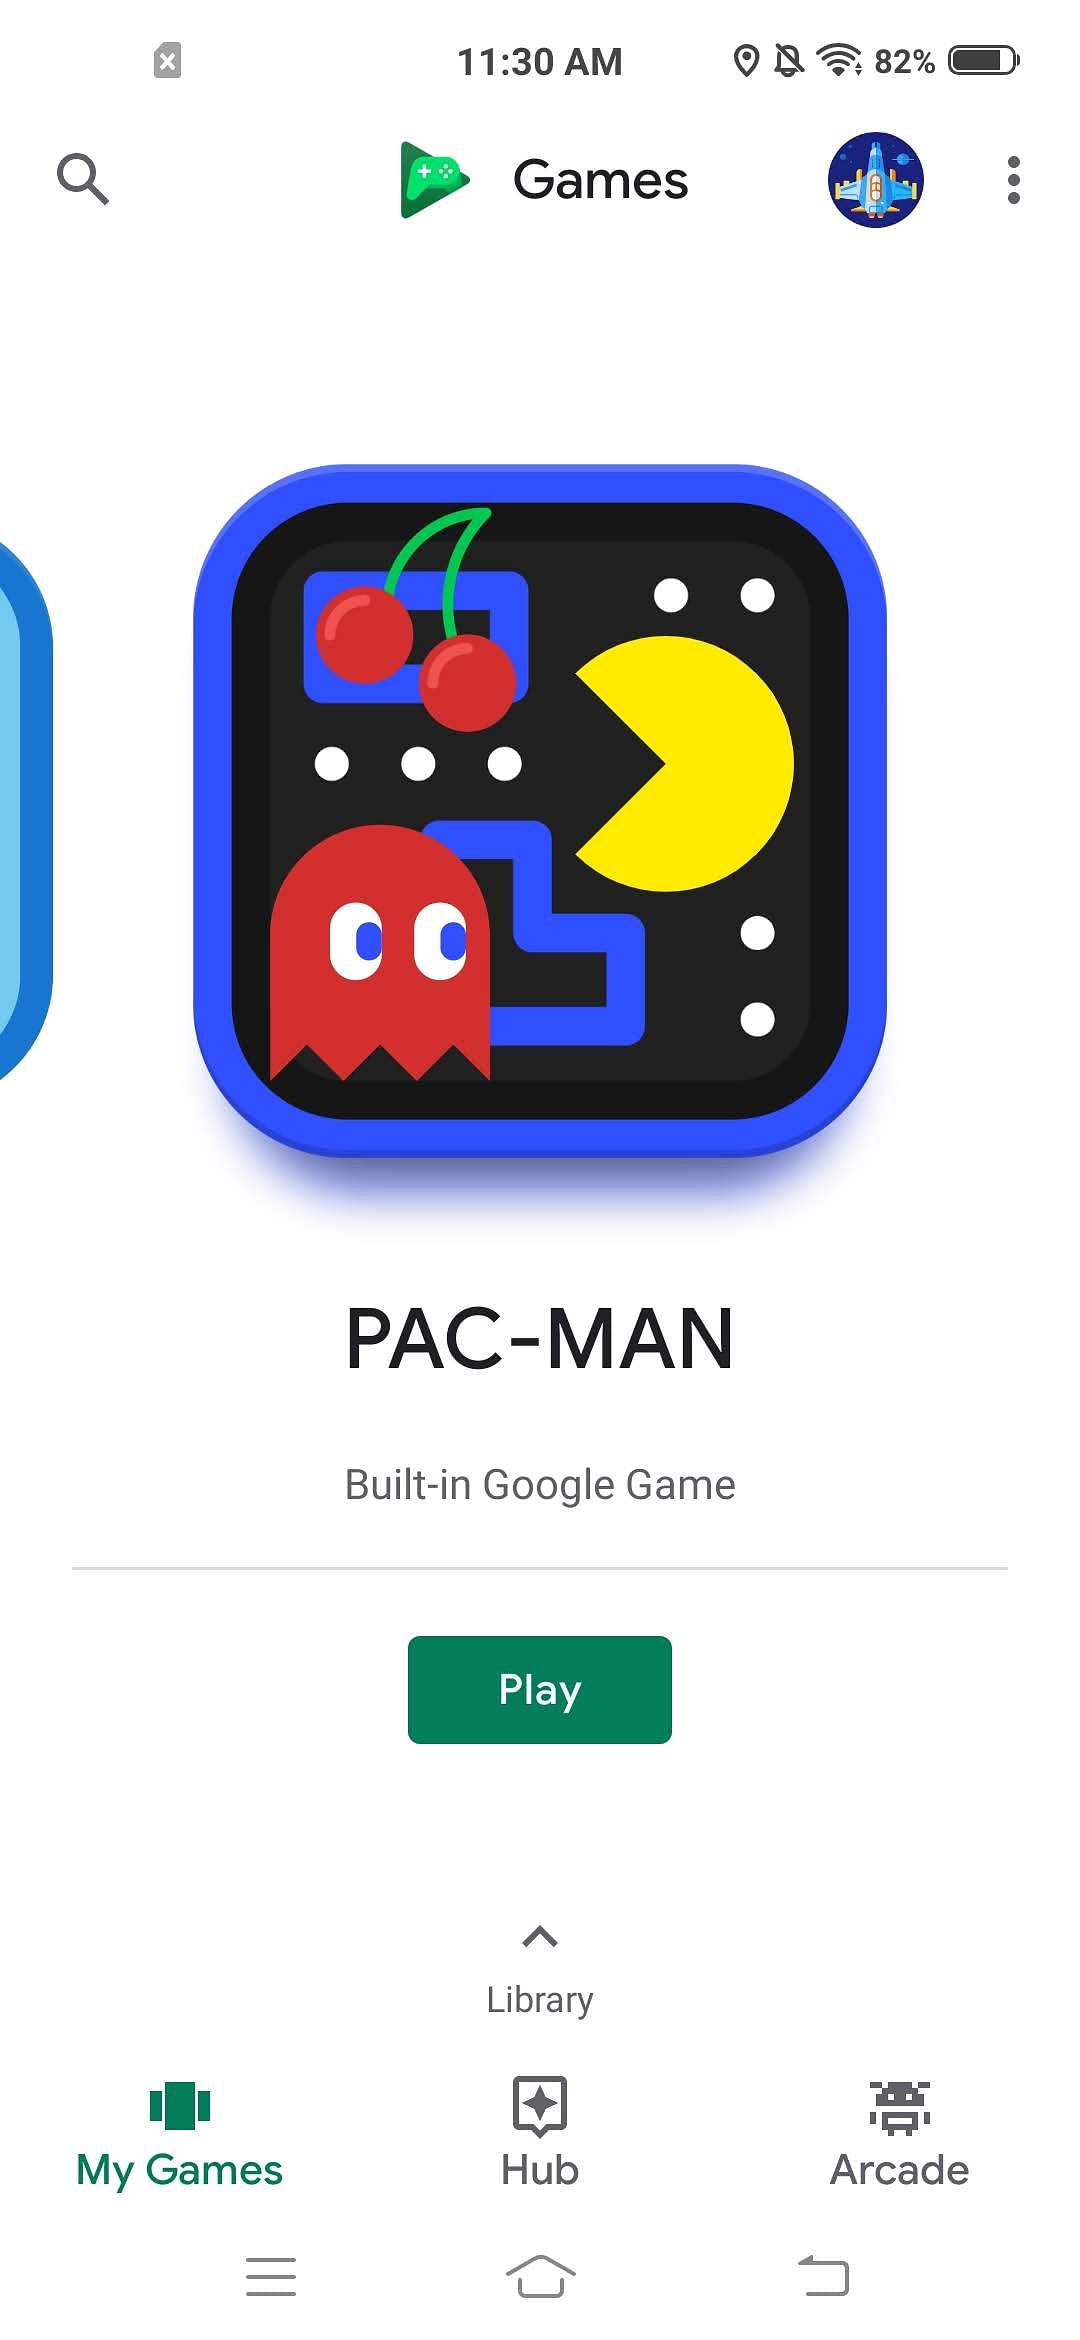 Google Play Games, a default app in most Android phones, has Pac-Man, Snake and even Cricket as built-in games.